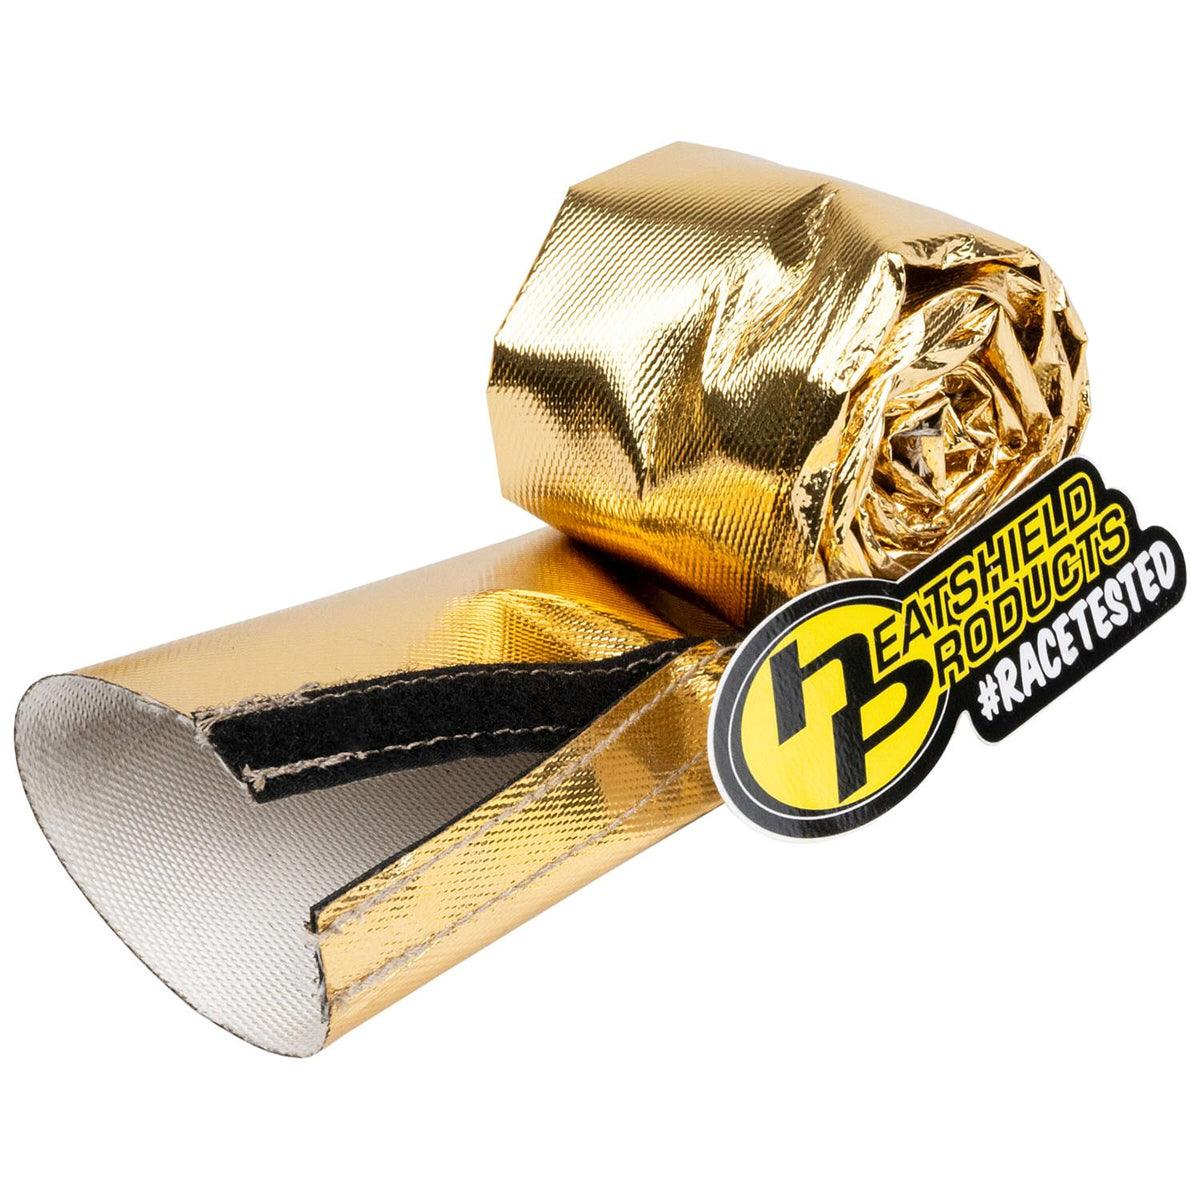 Cold-Gold Sleeve 1-1/2in ID x 3ft - Burlile Performance Products